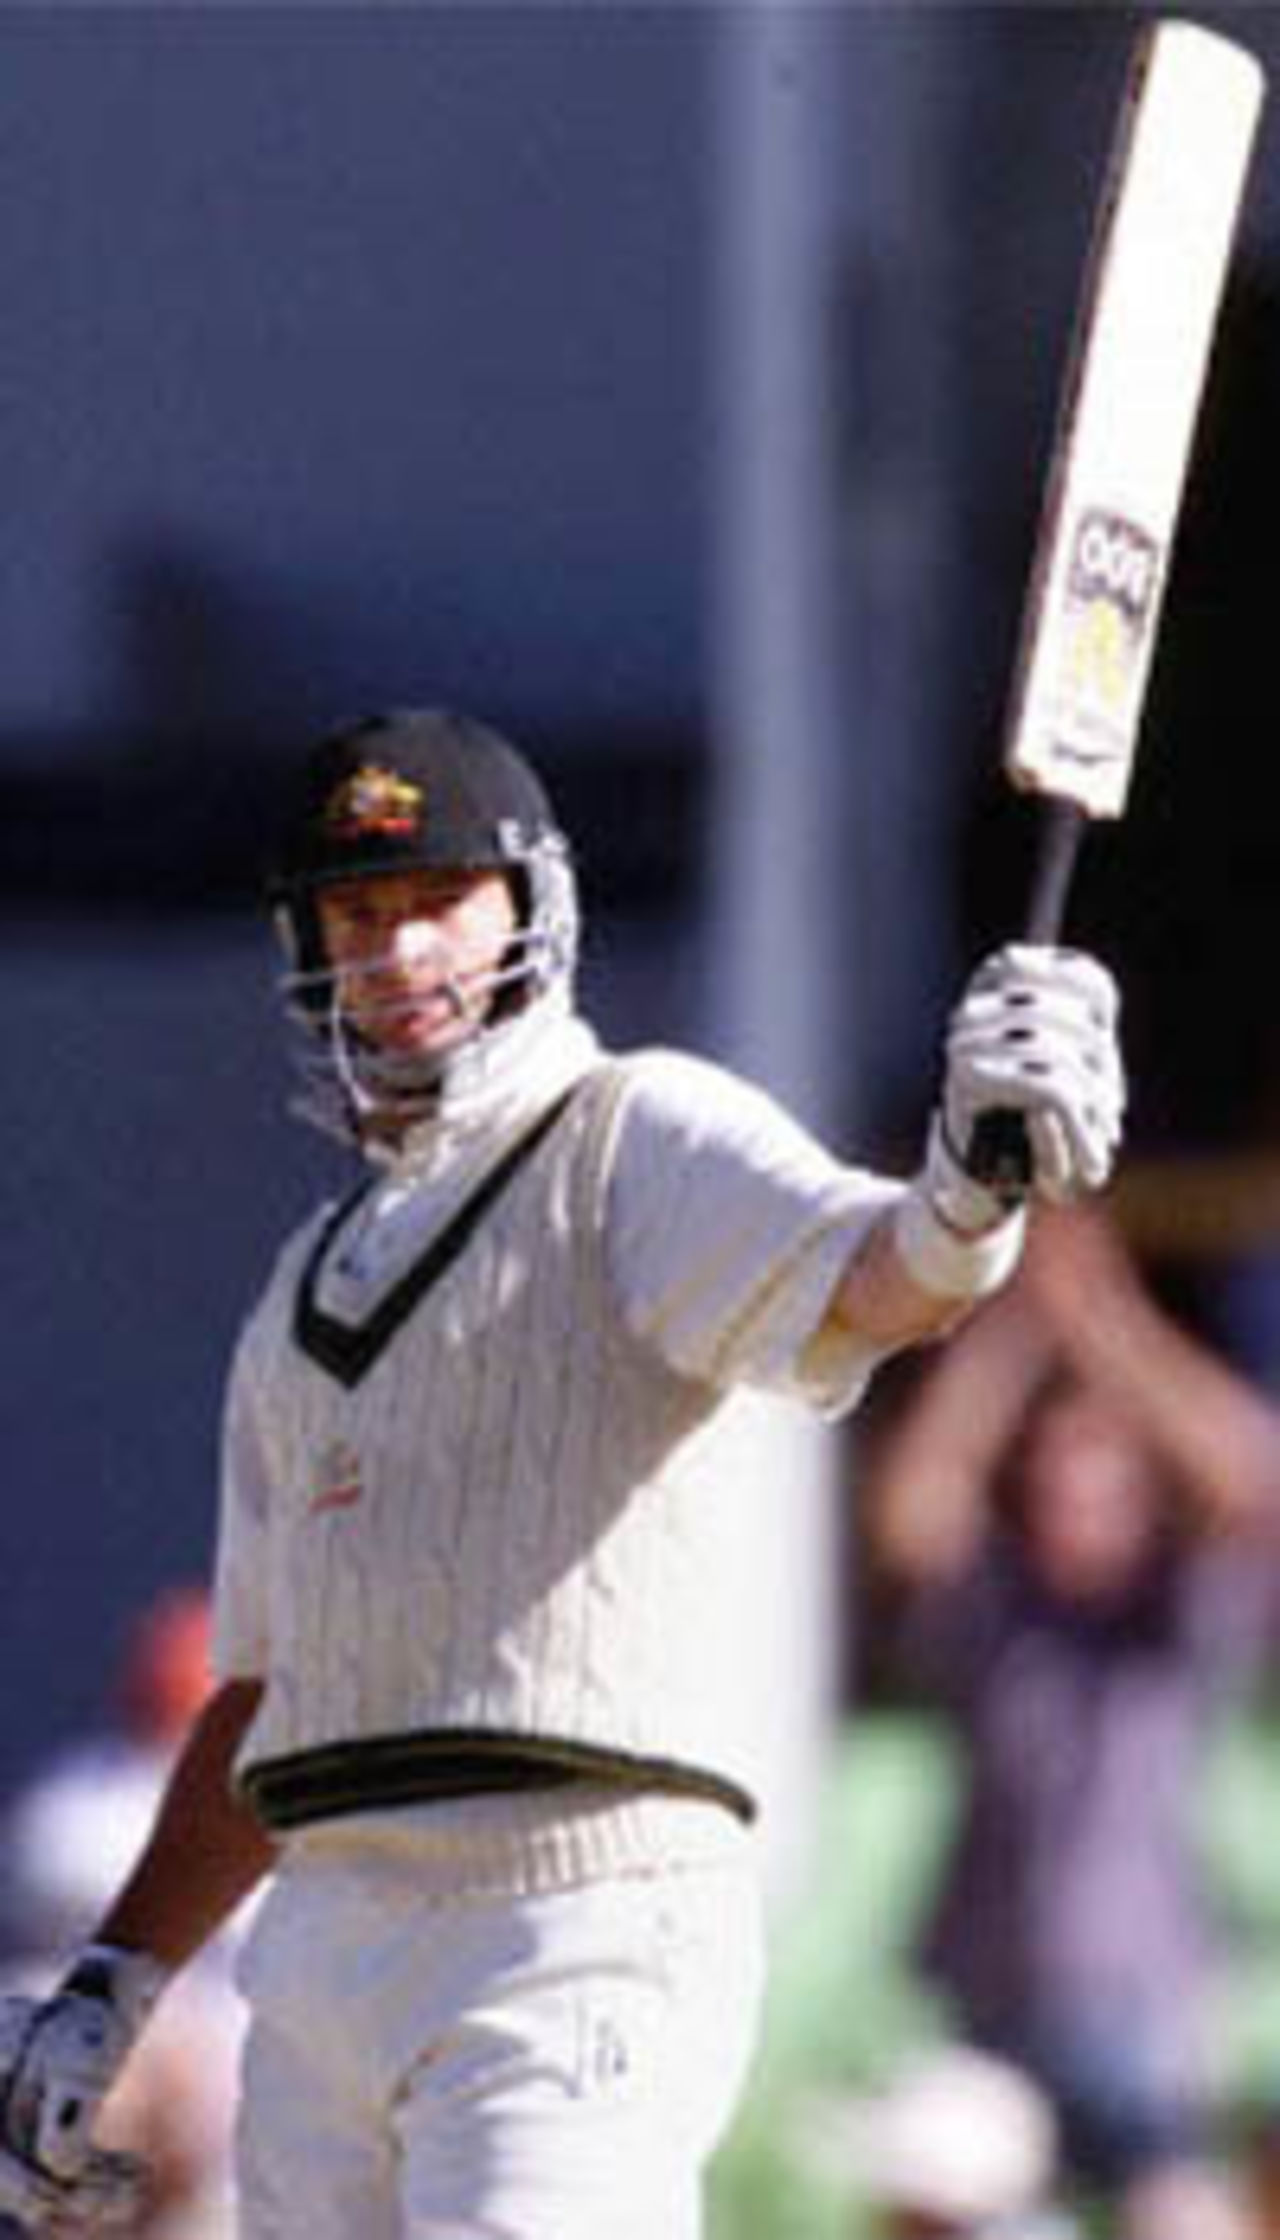 Mark Waugh acknowledges the crowd after reaching his century, The Frank Worrell Trophy, 2000/01, 2nd Test, Australia v West Indies, W.A.C.A. Ground, Perth, 01-05 December 2000 (Day 2).